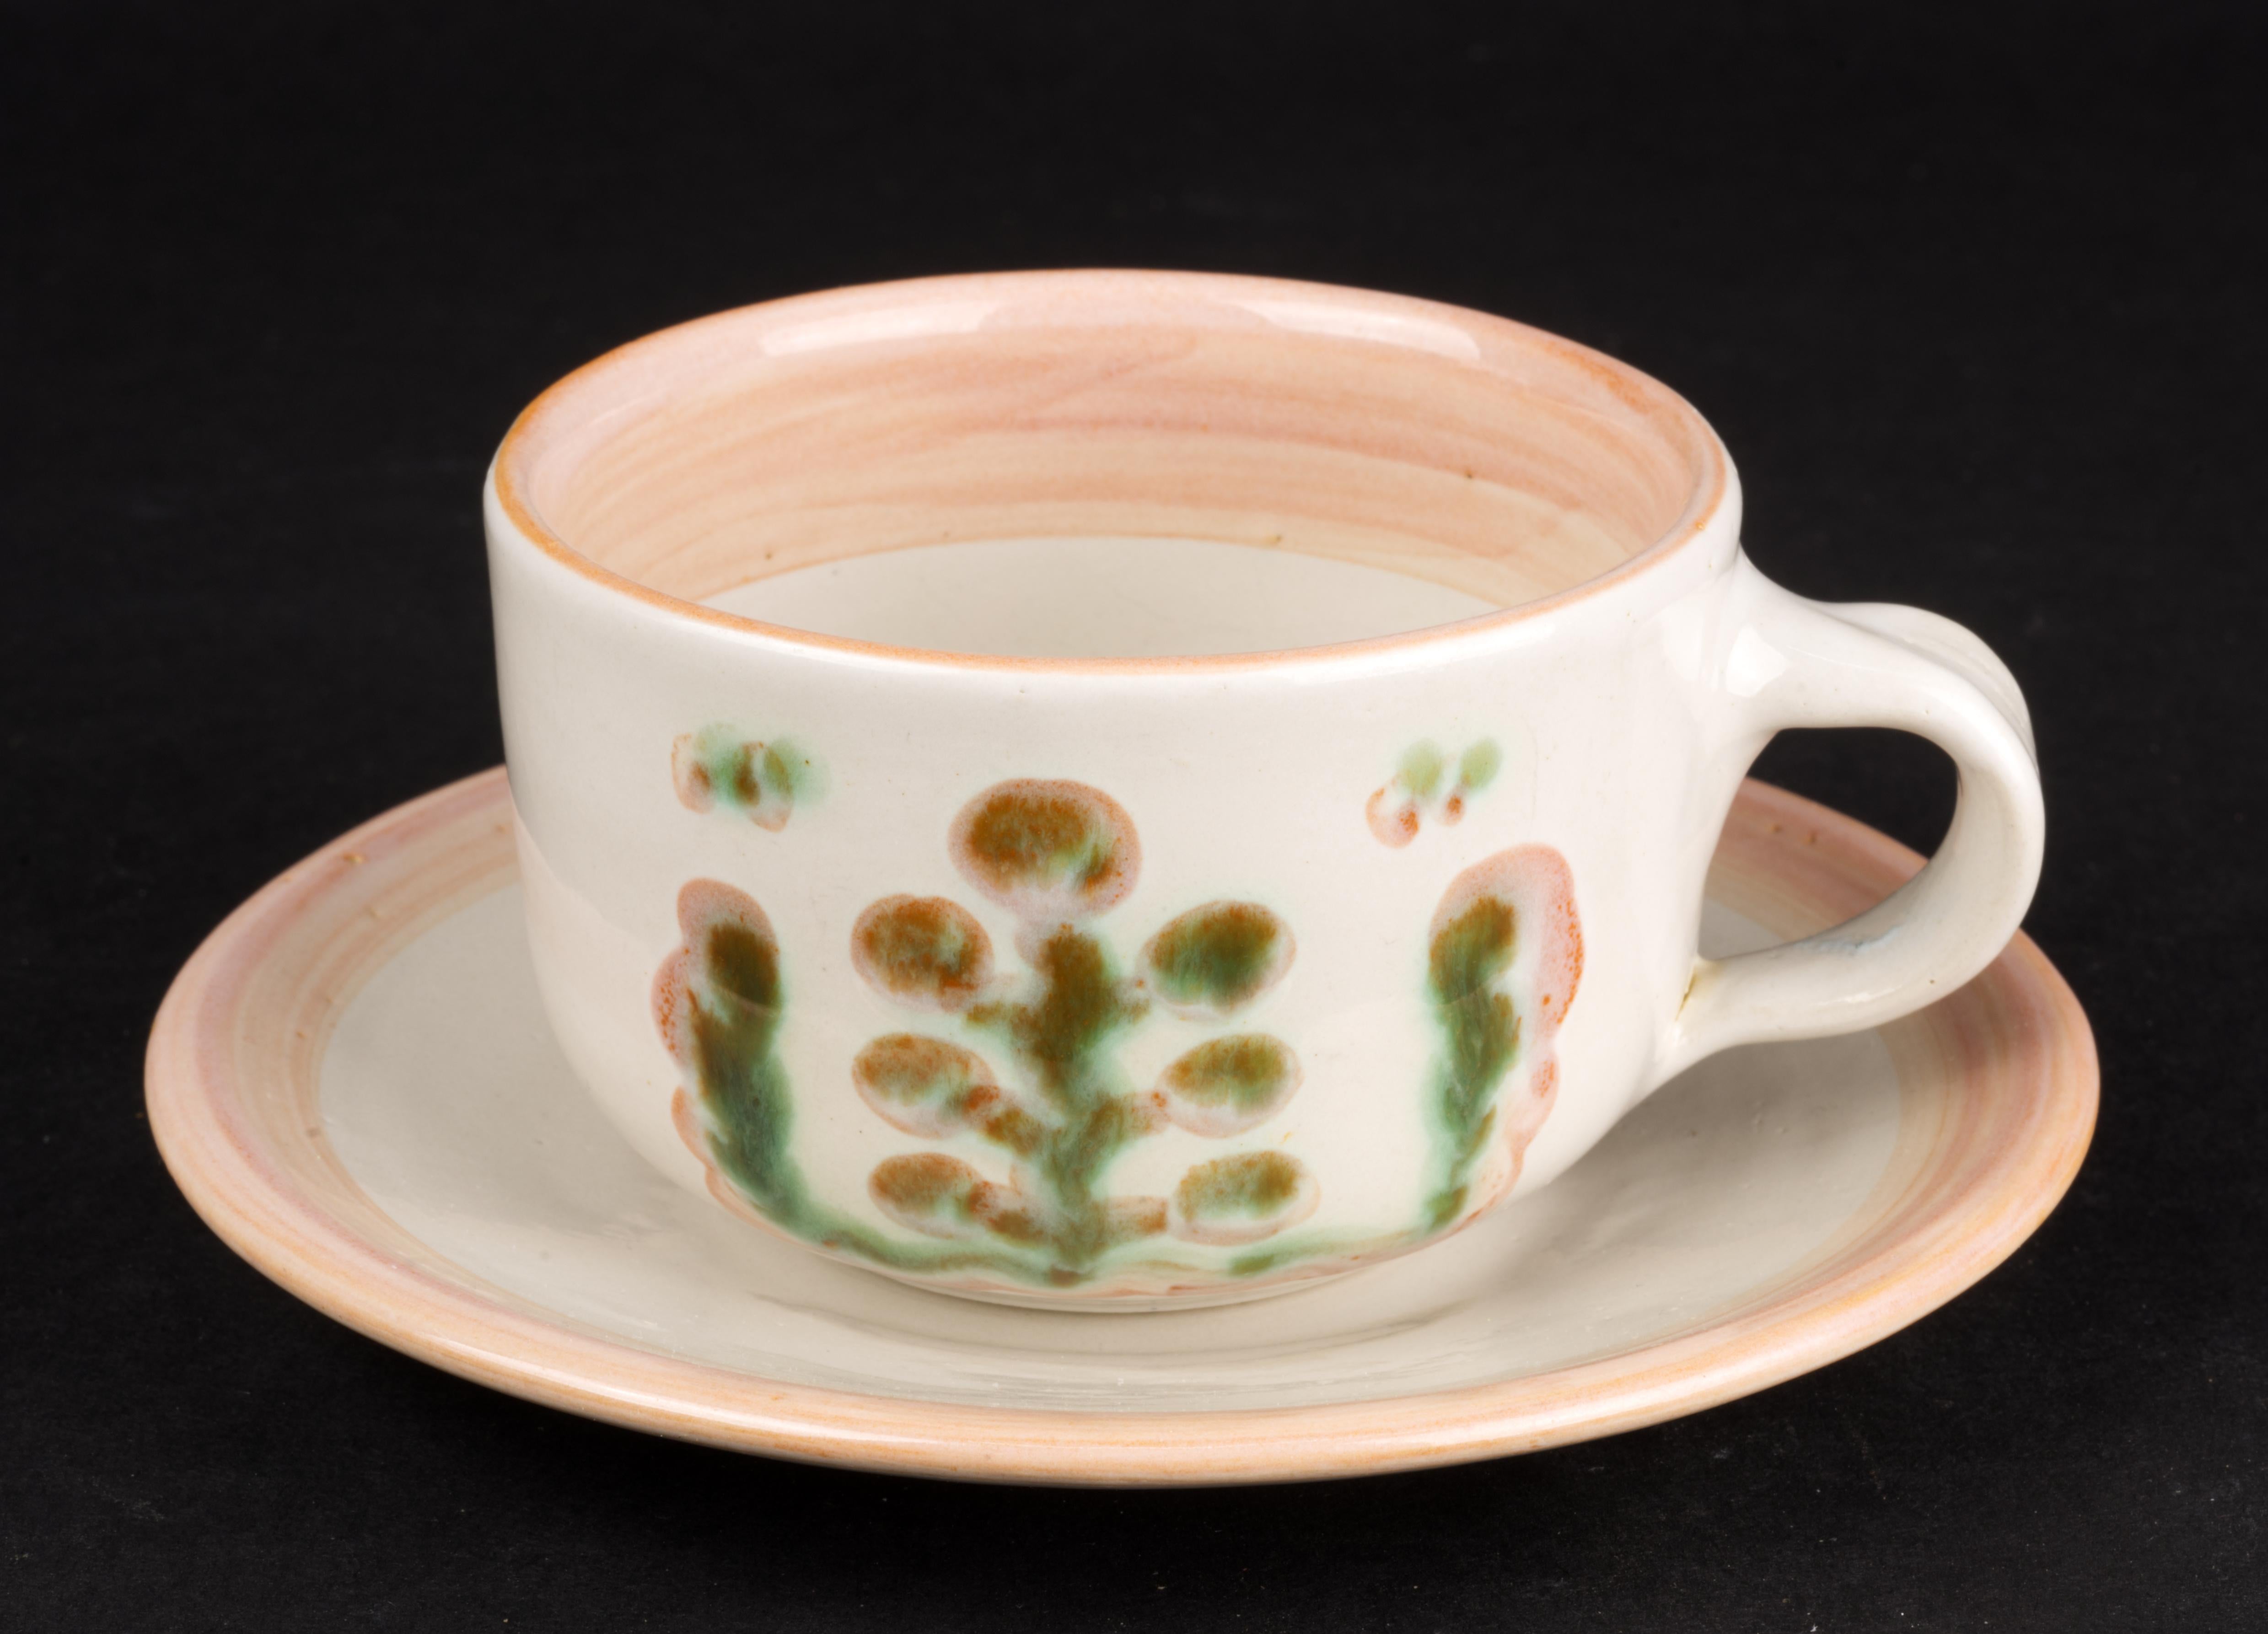  Tea or cappuccino cup and saucer were handmade by Hadley Pottery in Louisville, Kentucky. It is hand painted in minimal palette of green and pink with stylized plant and fruit designs done in thick glaze on off-white background and accented with